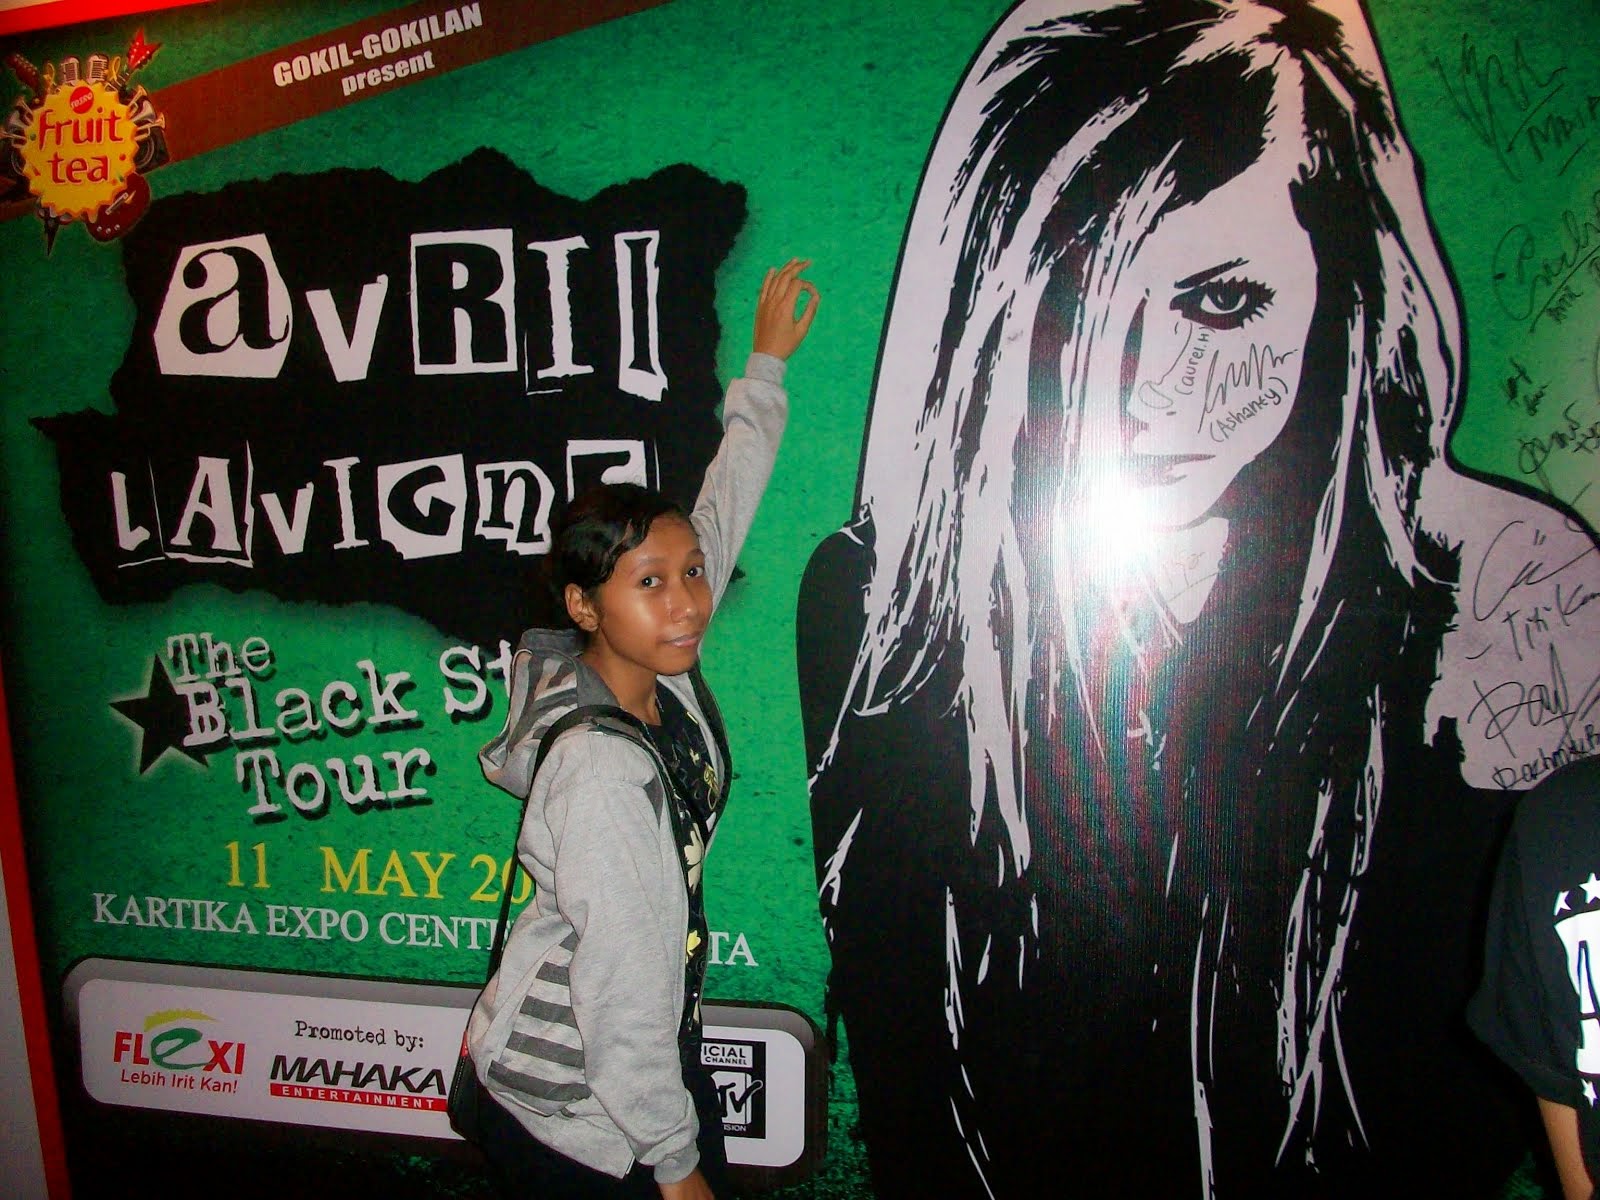 Me with Avril ;D